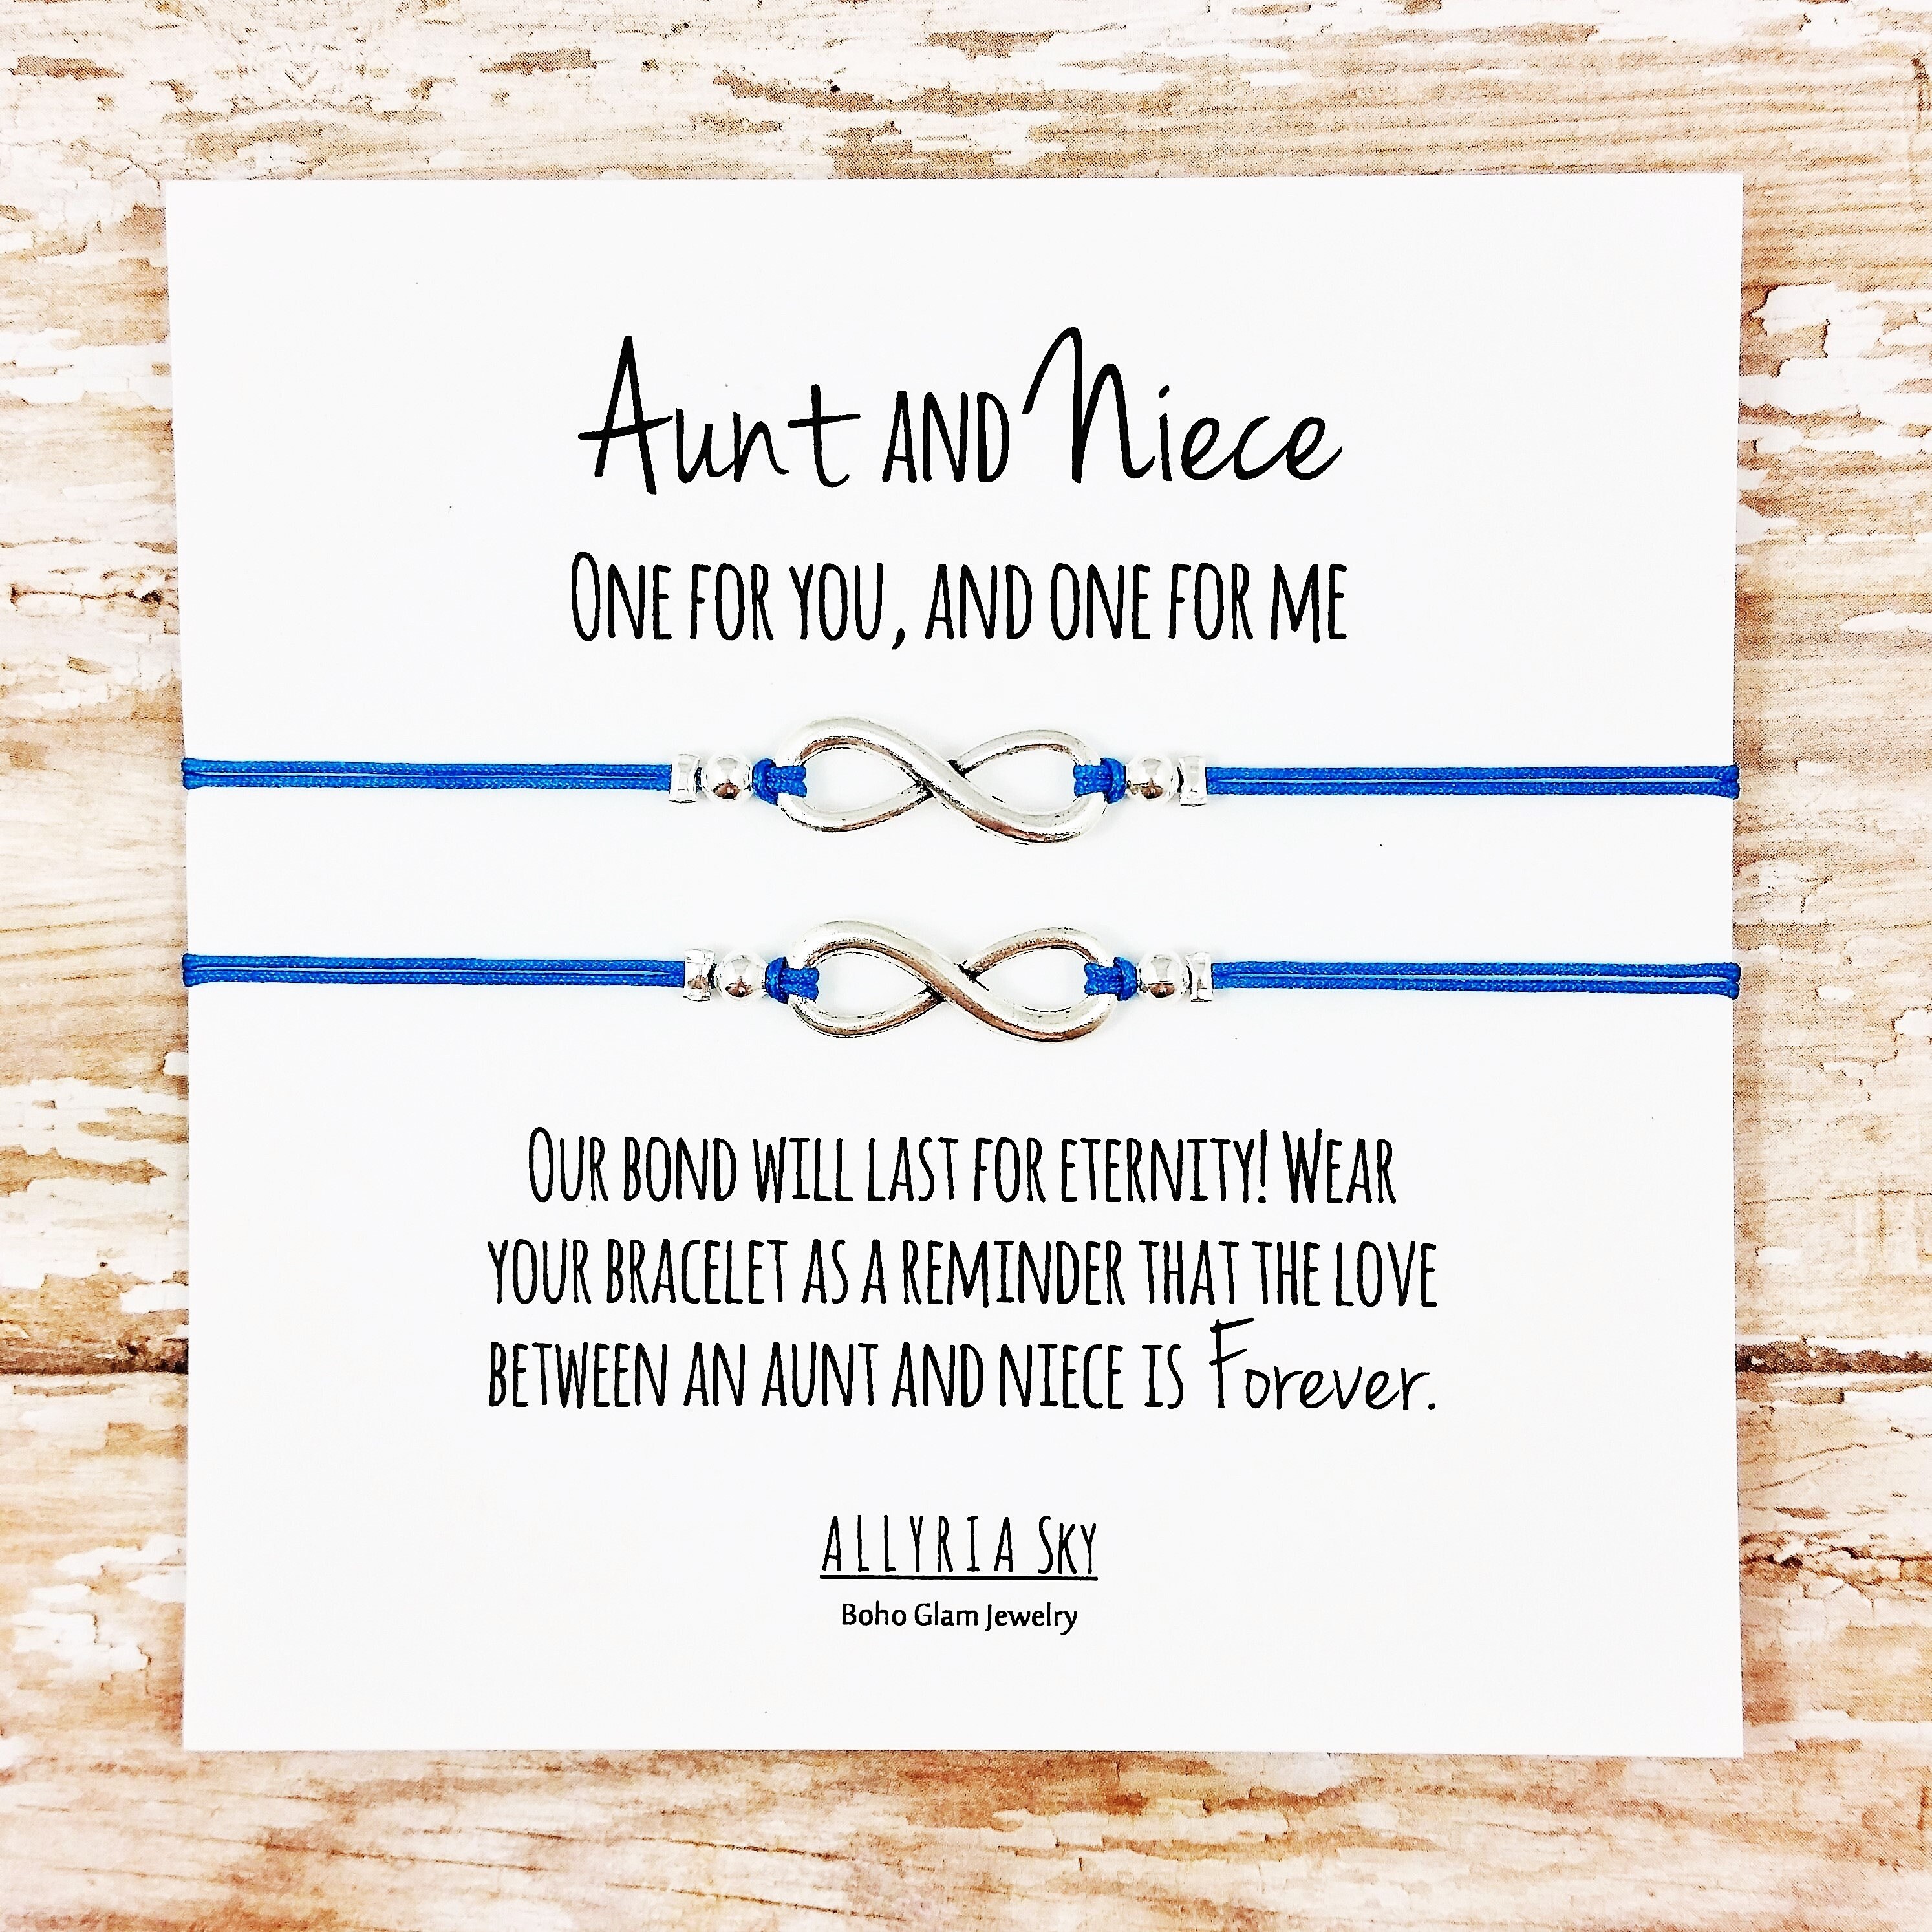 Dainty Aunt Gift Engraved The Love Between an Aunt and Niece Lasts Forever Initial Charm Bracelets Aunt Bracelet Gifts for Women Best Aunt Ever Gifts from Niece Nephew Yoosteel Aunt Gifts from Niece 